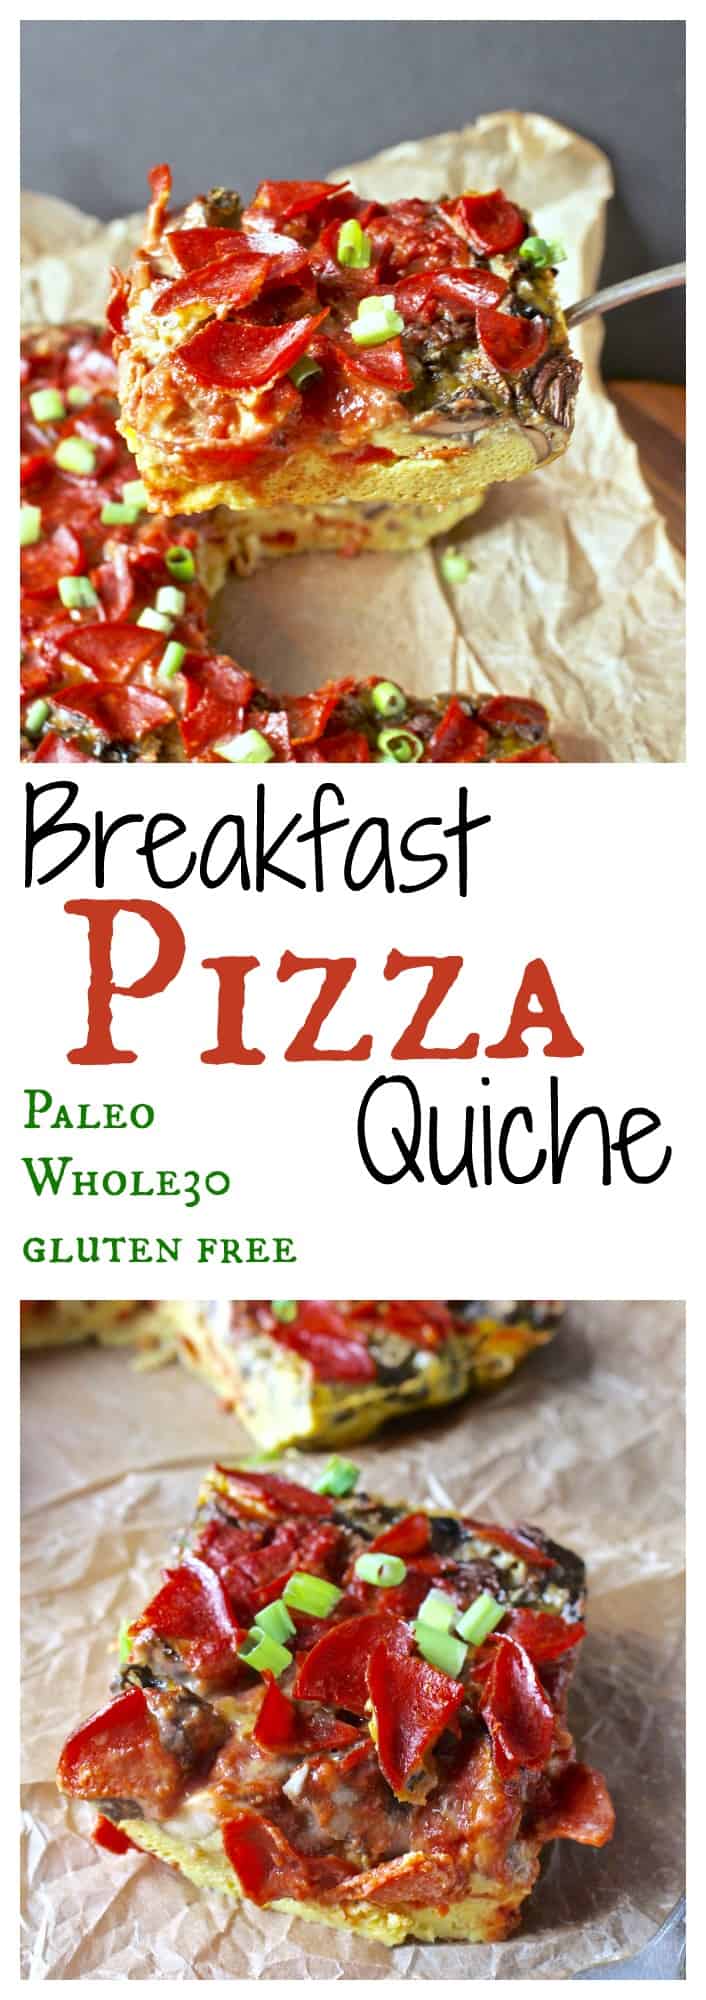 This Paleo Breakfast Pizza Quiche has all the flavors you love about pizza, but made to be eaten at breakfast...or anytime of day. Hearty and delicious while being Whole30, gluten free, and dairy free. 